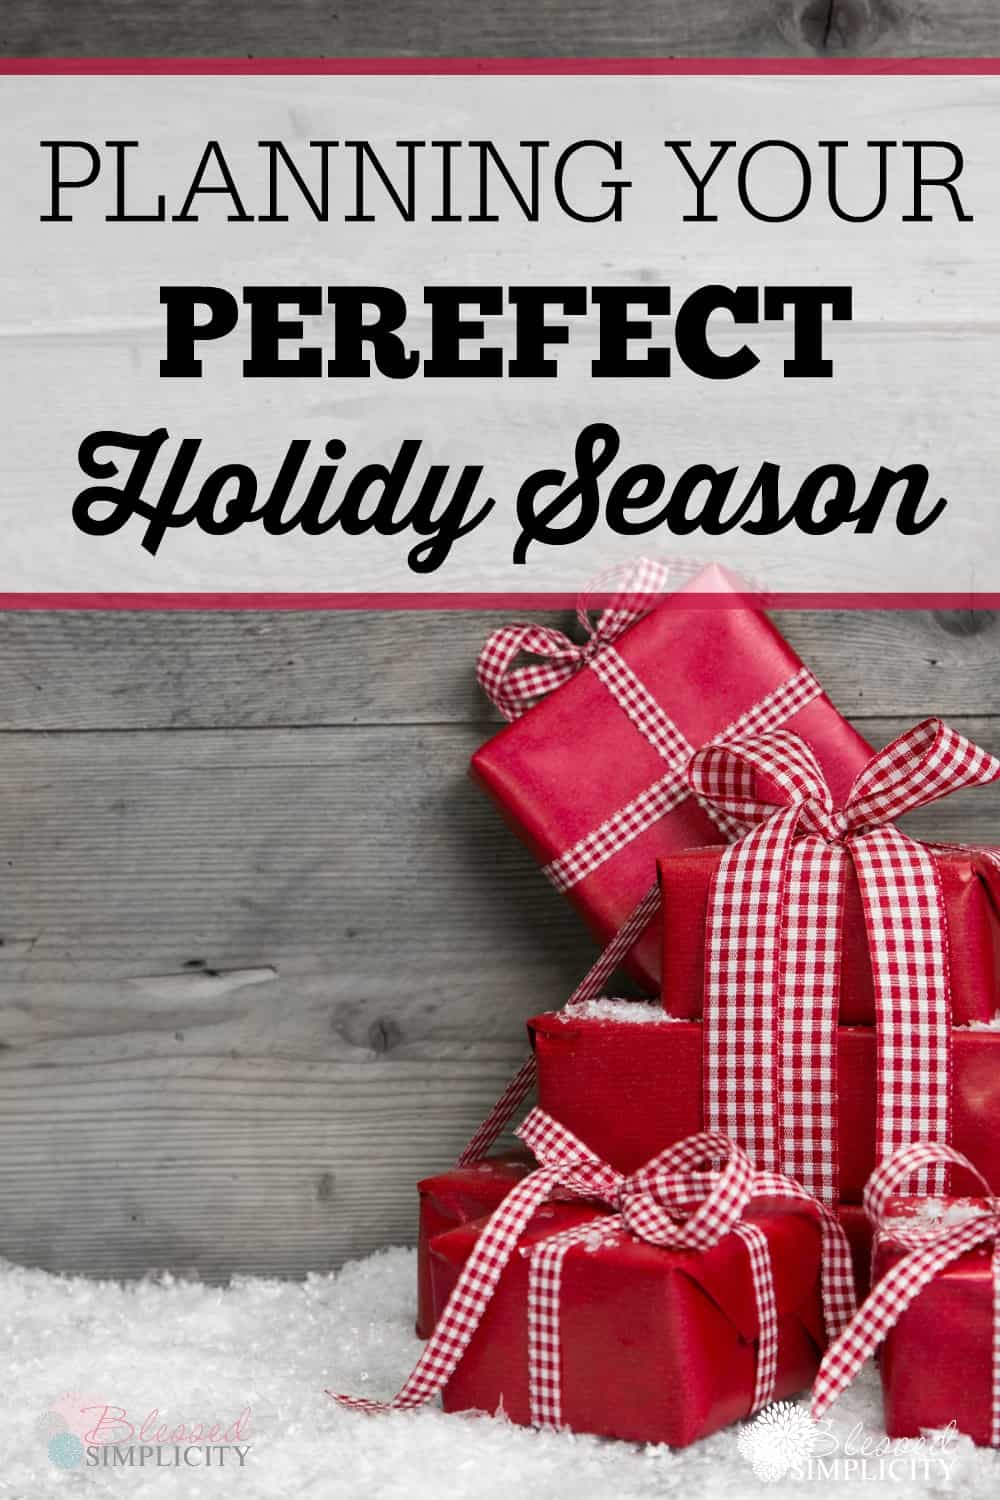 Plan your perfect holiday season with these free printable journaling pages!